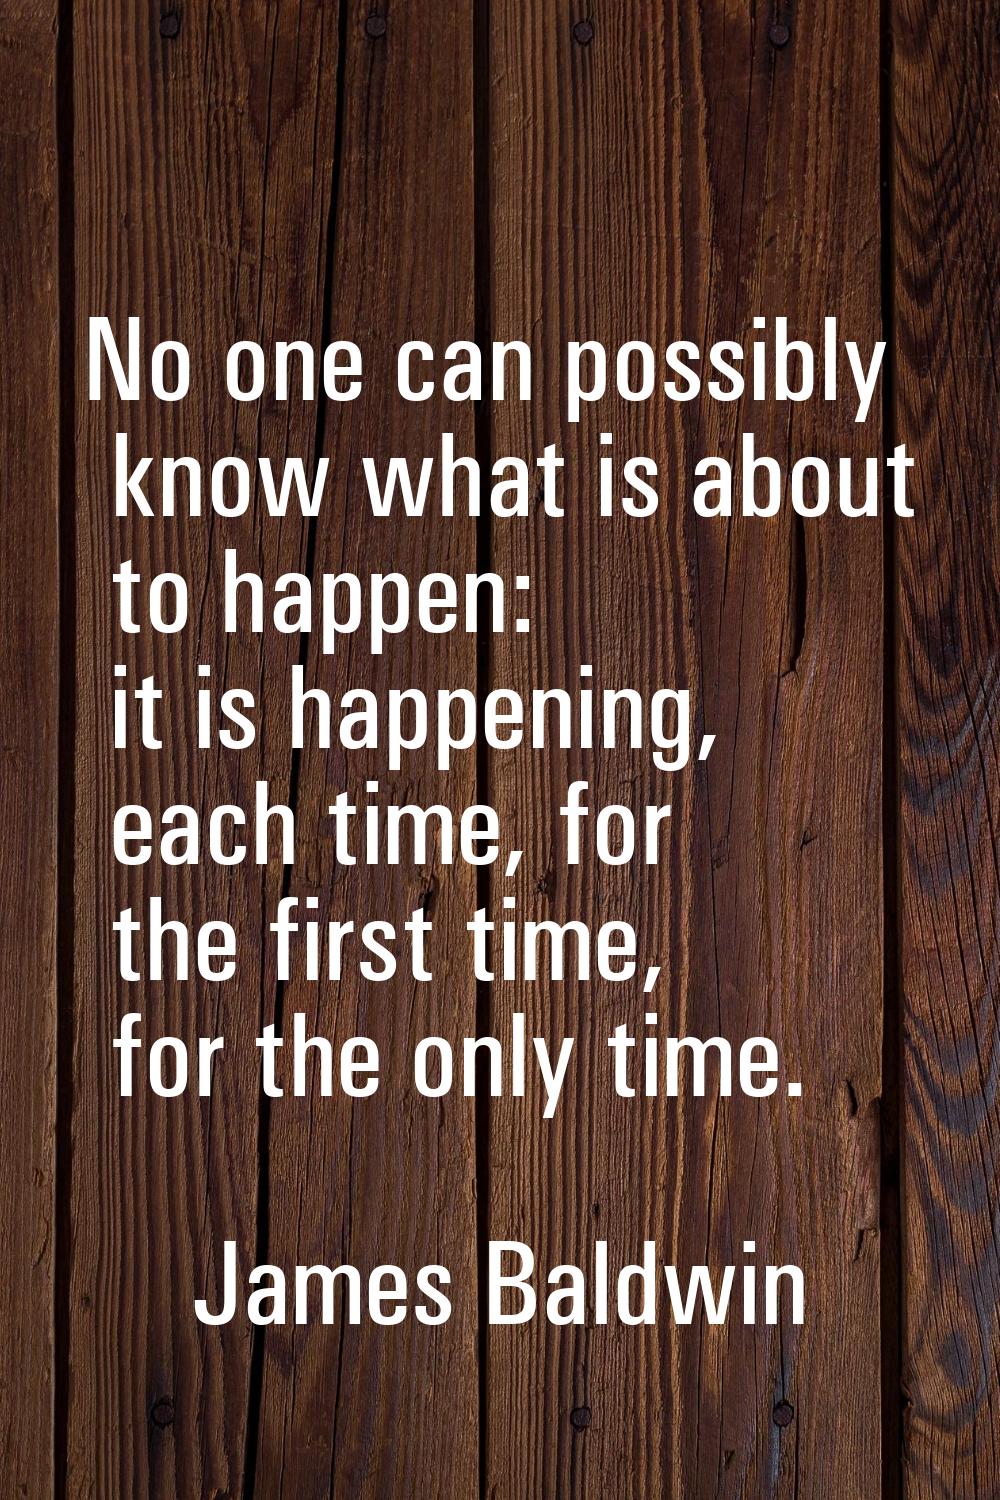 No one can possibly know what is about to happen: it is happening, each time, for the first time, f